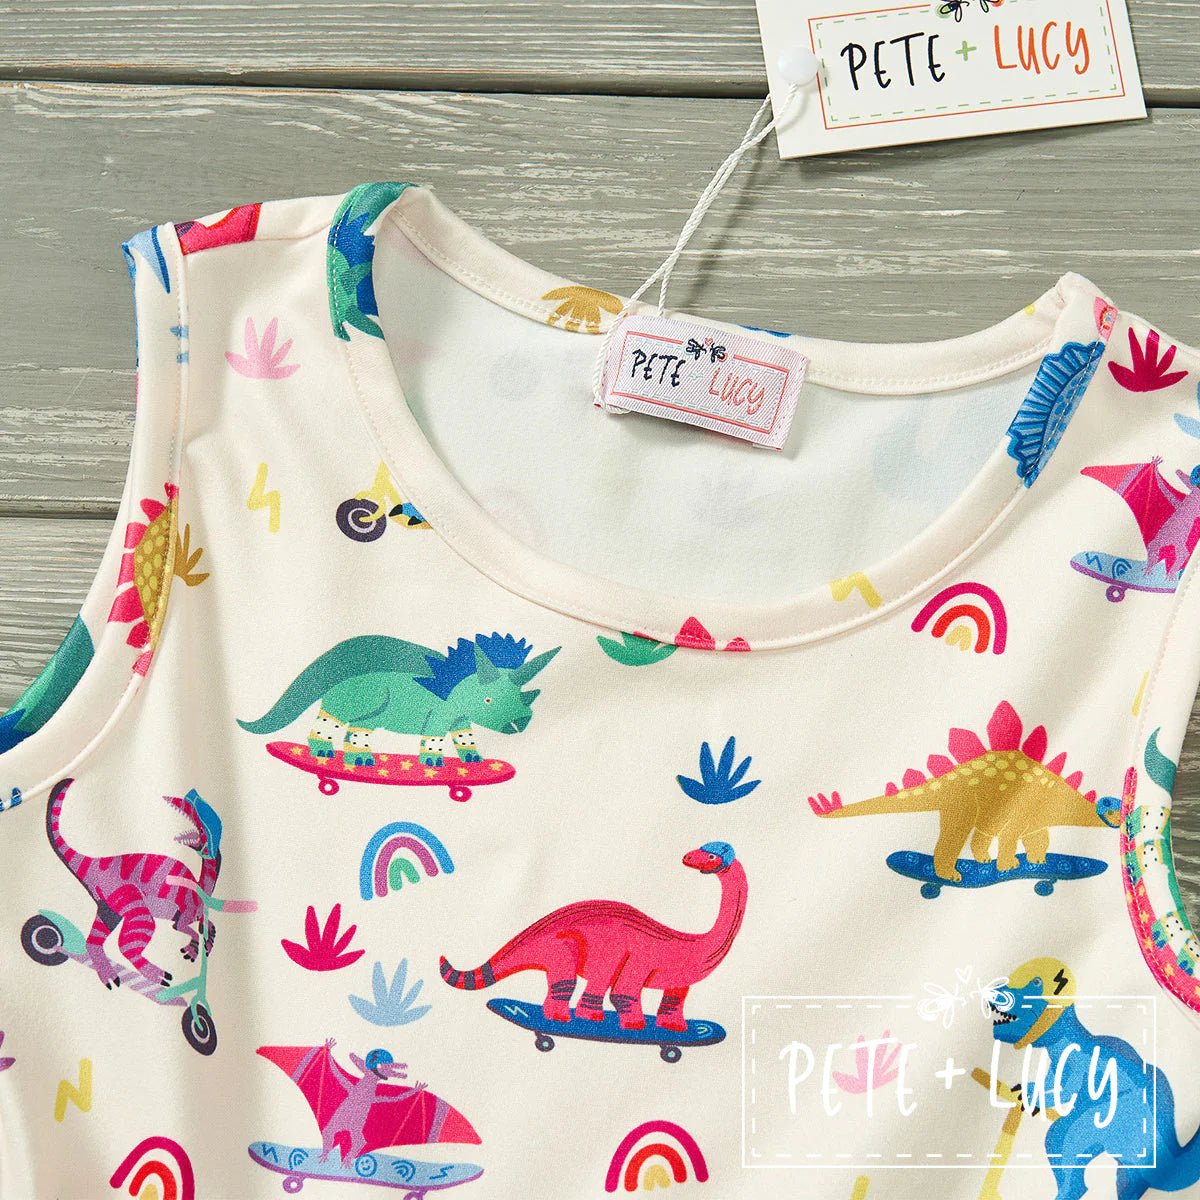 Dino Party Dress by Pete + Lucy